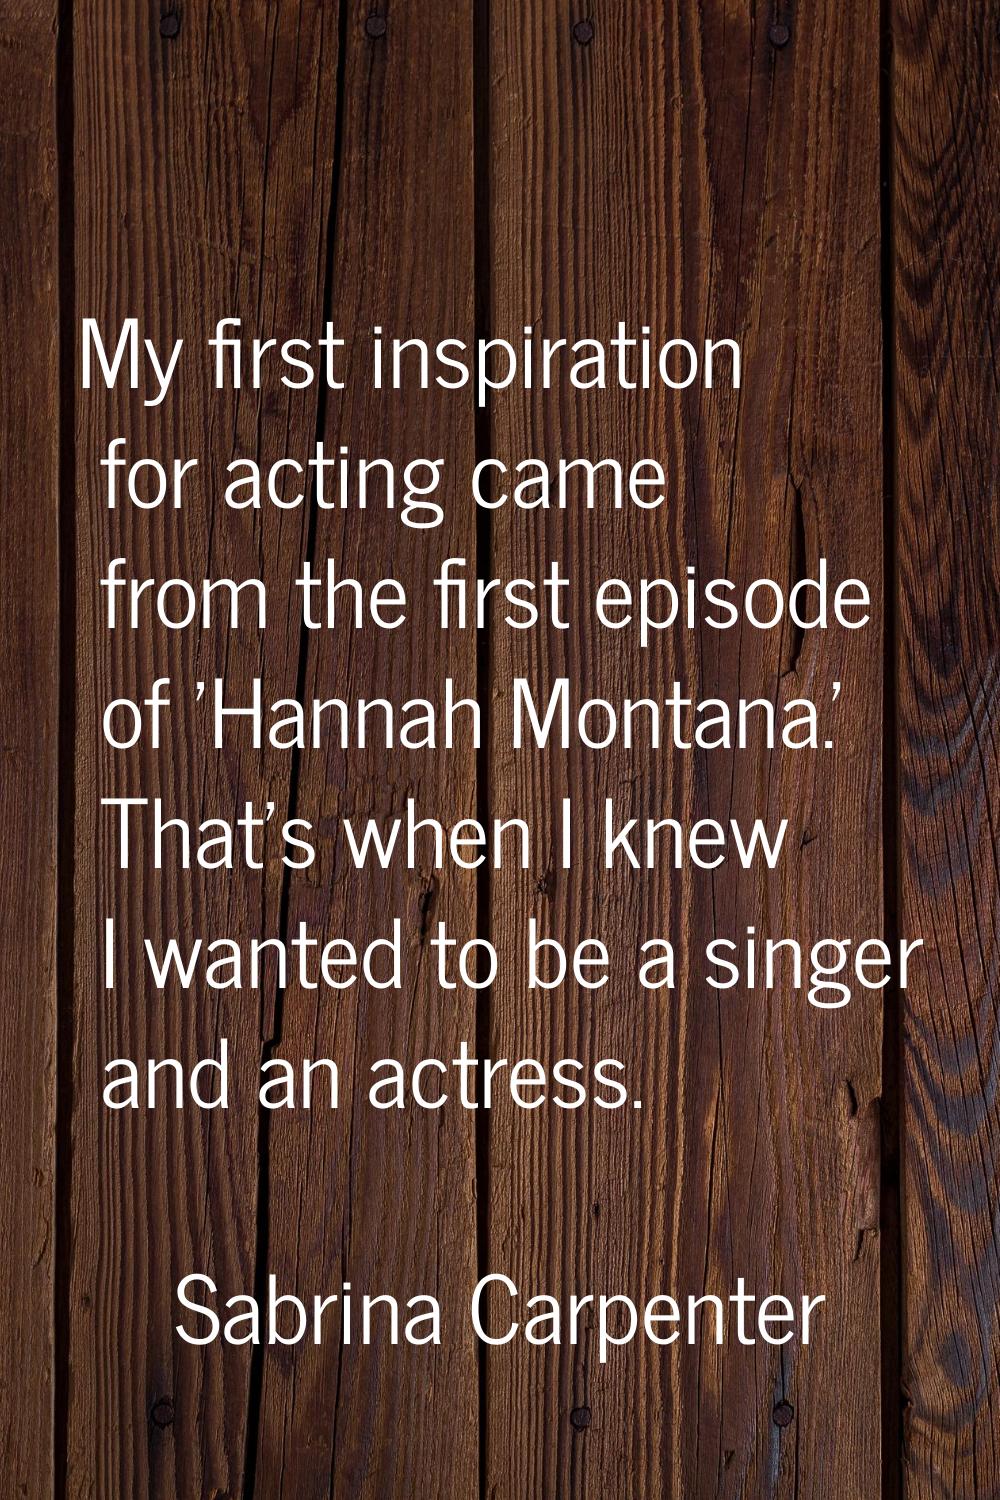 My first inspiration for acting came from the first episode of 'Hannah Montana.' That's when I knew